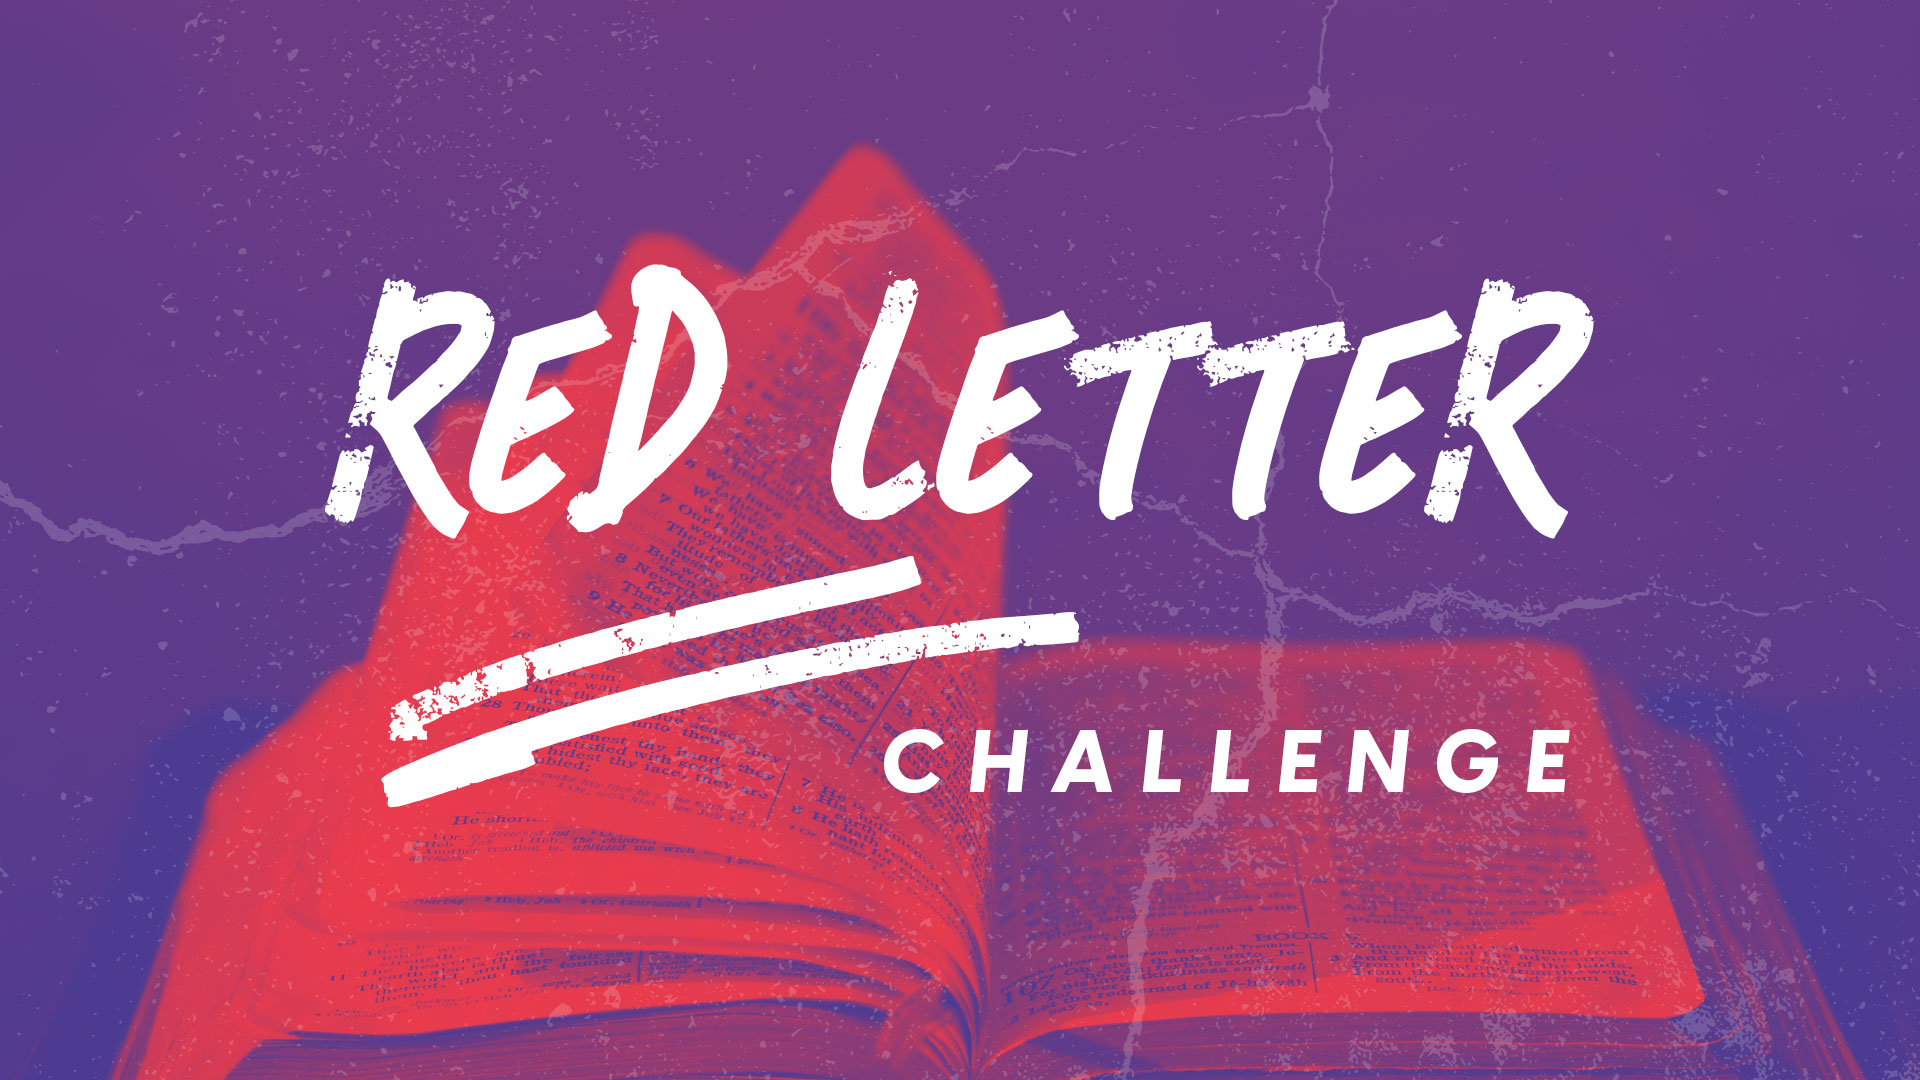 The Red Letter Challenge